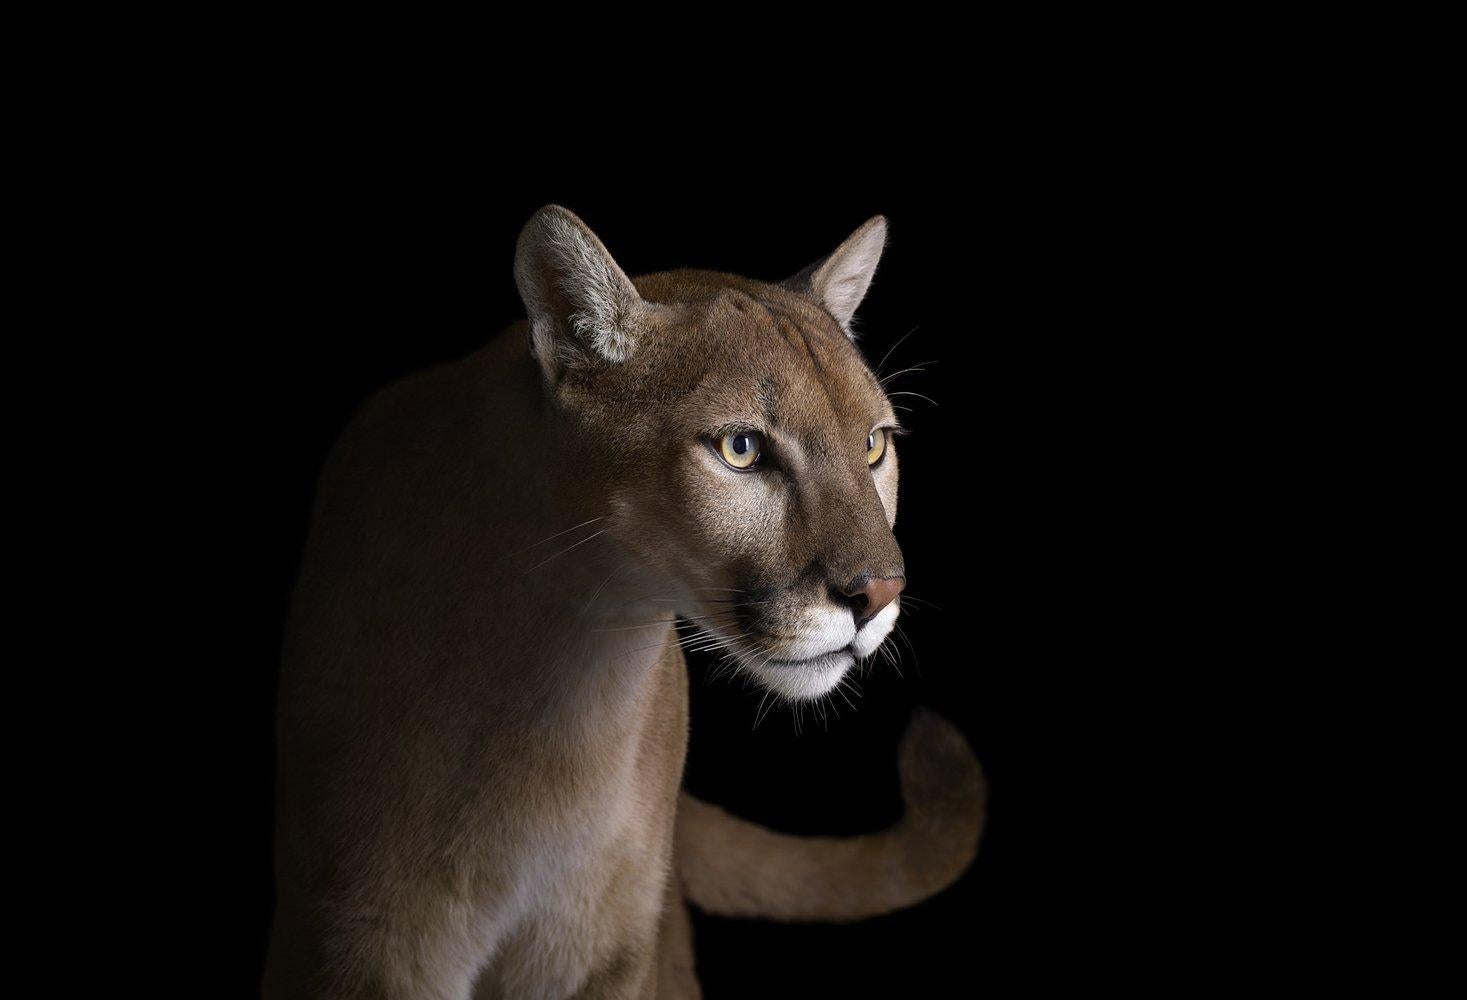 'Mountain Lion #4, Los Angeles, CA, 2011' is a limited-edition photograph by contemporary artist Brad Wilson from the ‘Affinity’ series which features studio portraits of wild animals. 

This photograph is sold unframed as a print only. It is